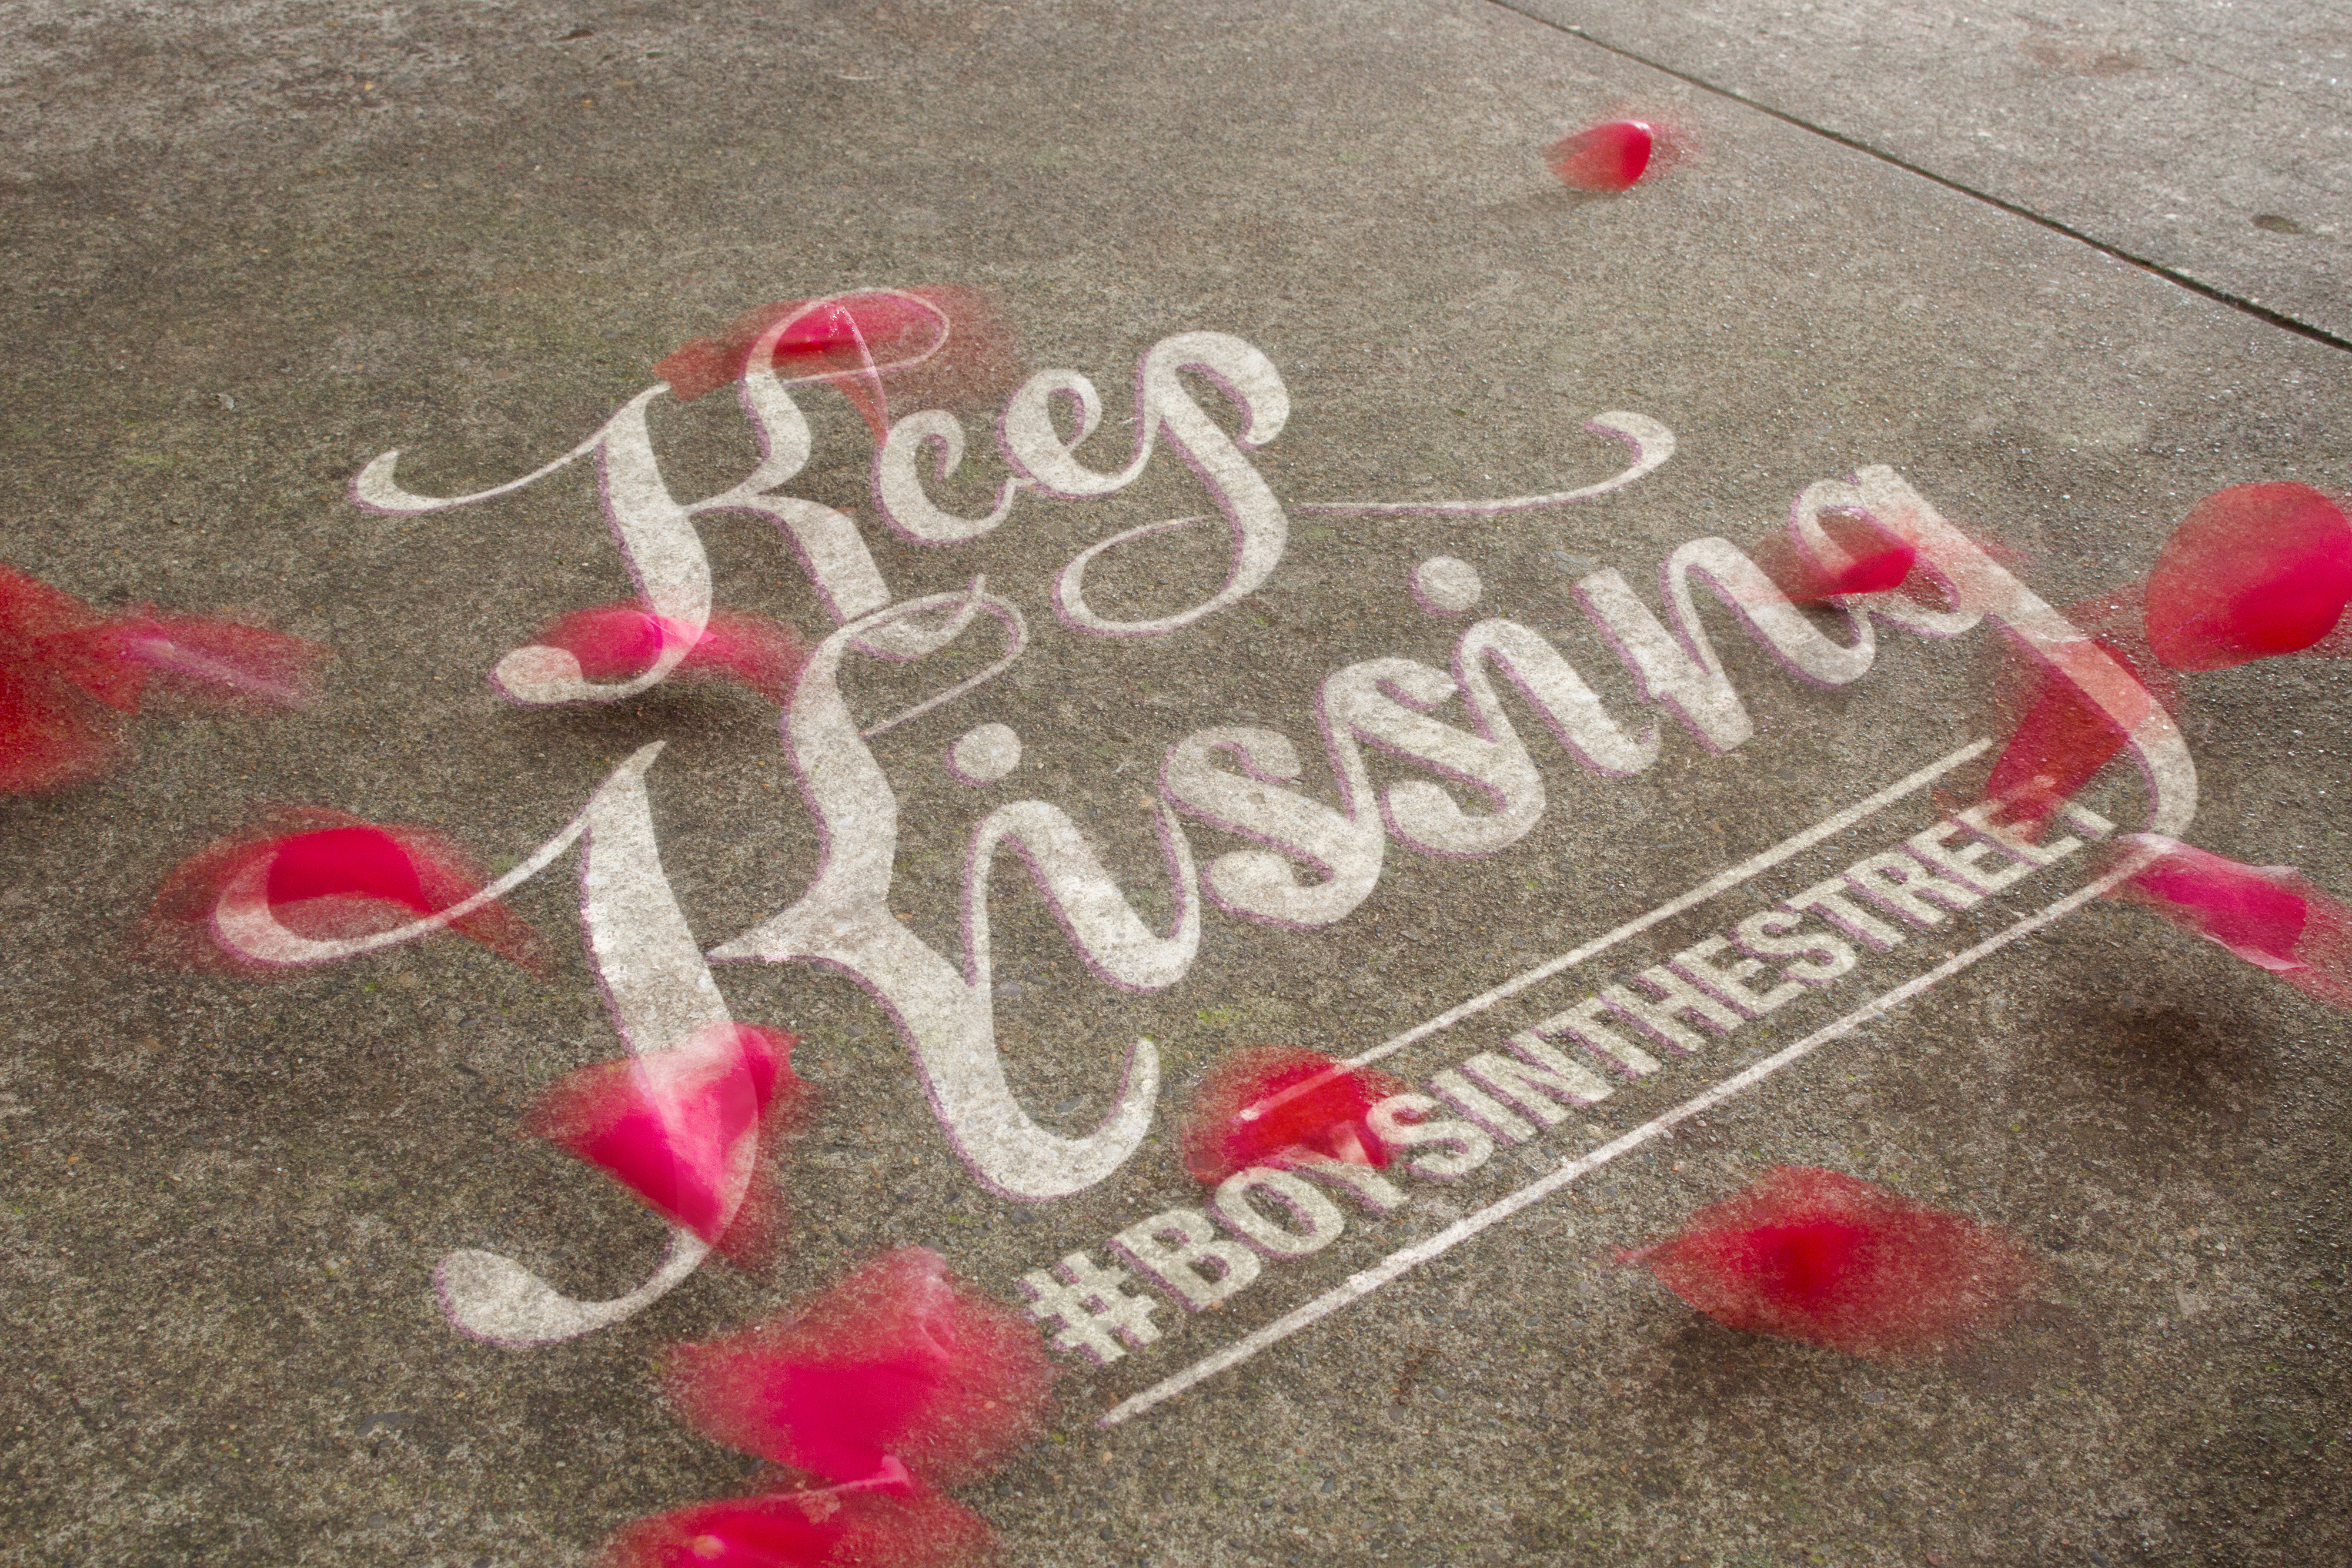 Keep Kissing Boys on the Street song title graffiti art with rose petals  — Studio 3, Inc.